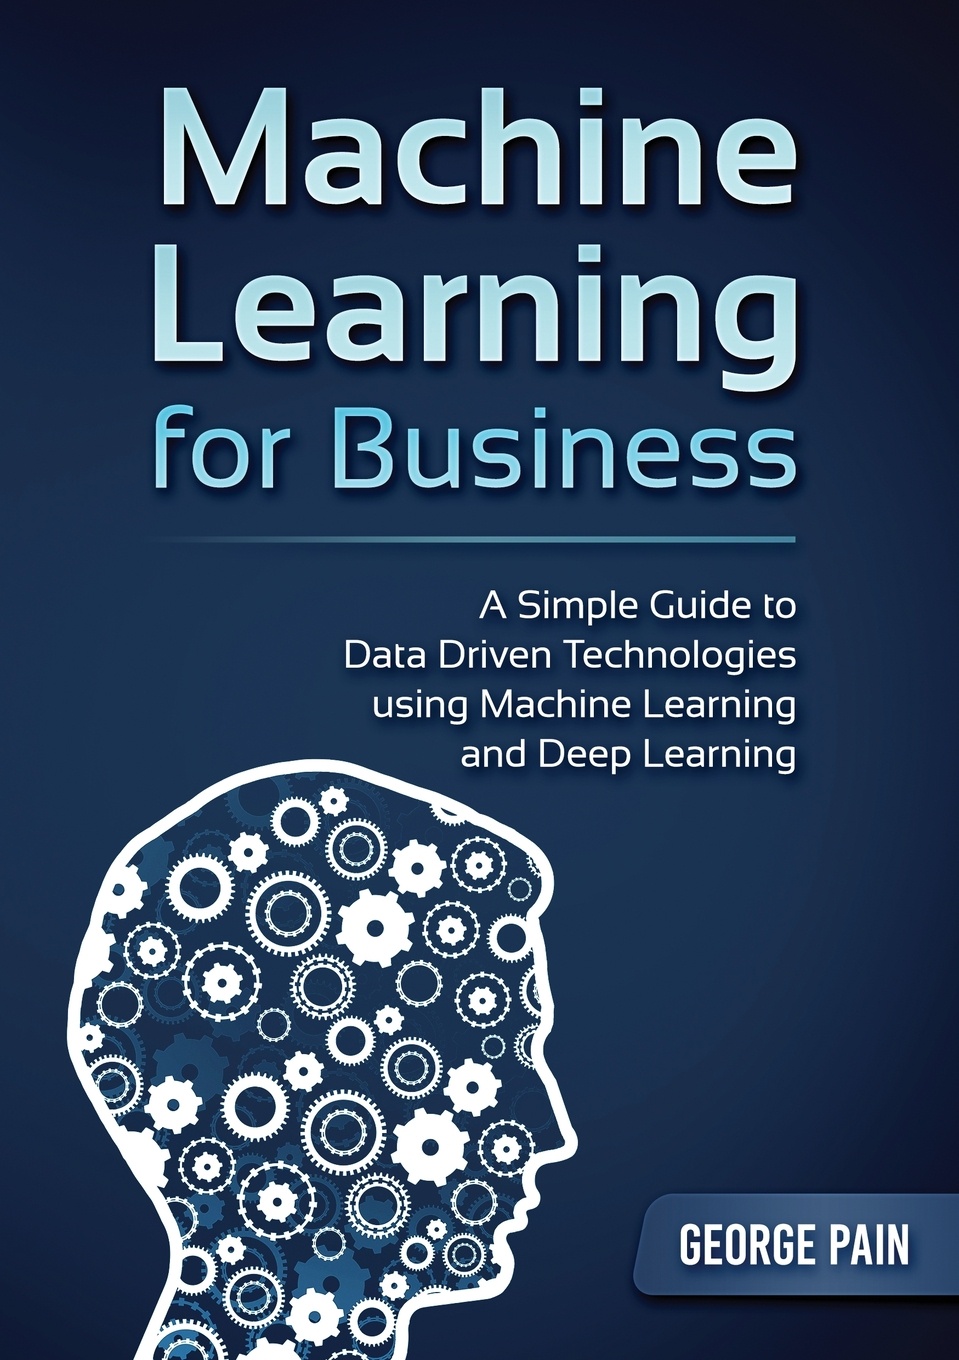 A Simple Guide to Data Driven Technologies using Machine Learning and Deep Learning. Machine Learning for Business